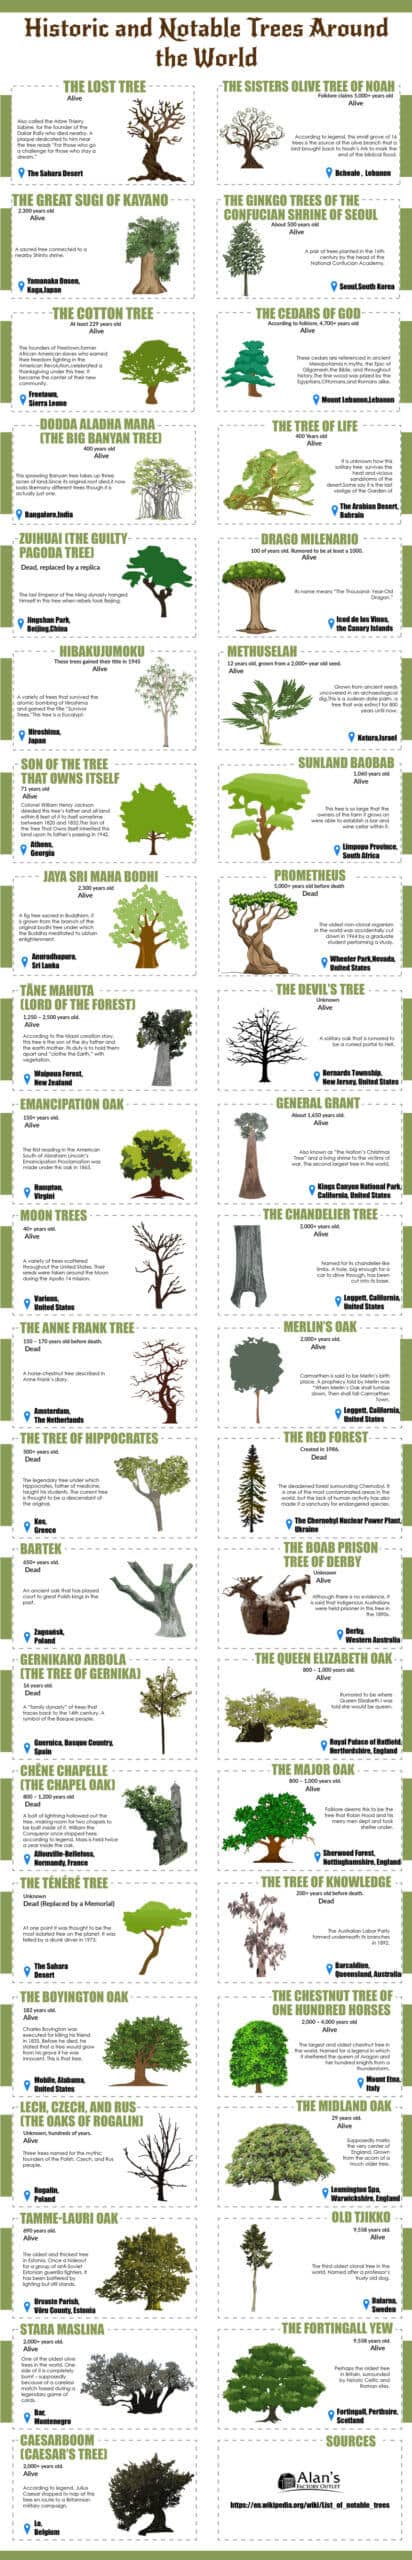 Historic and Notable Trees Around the World